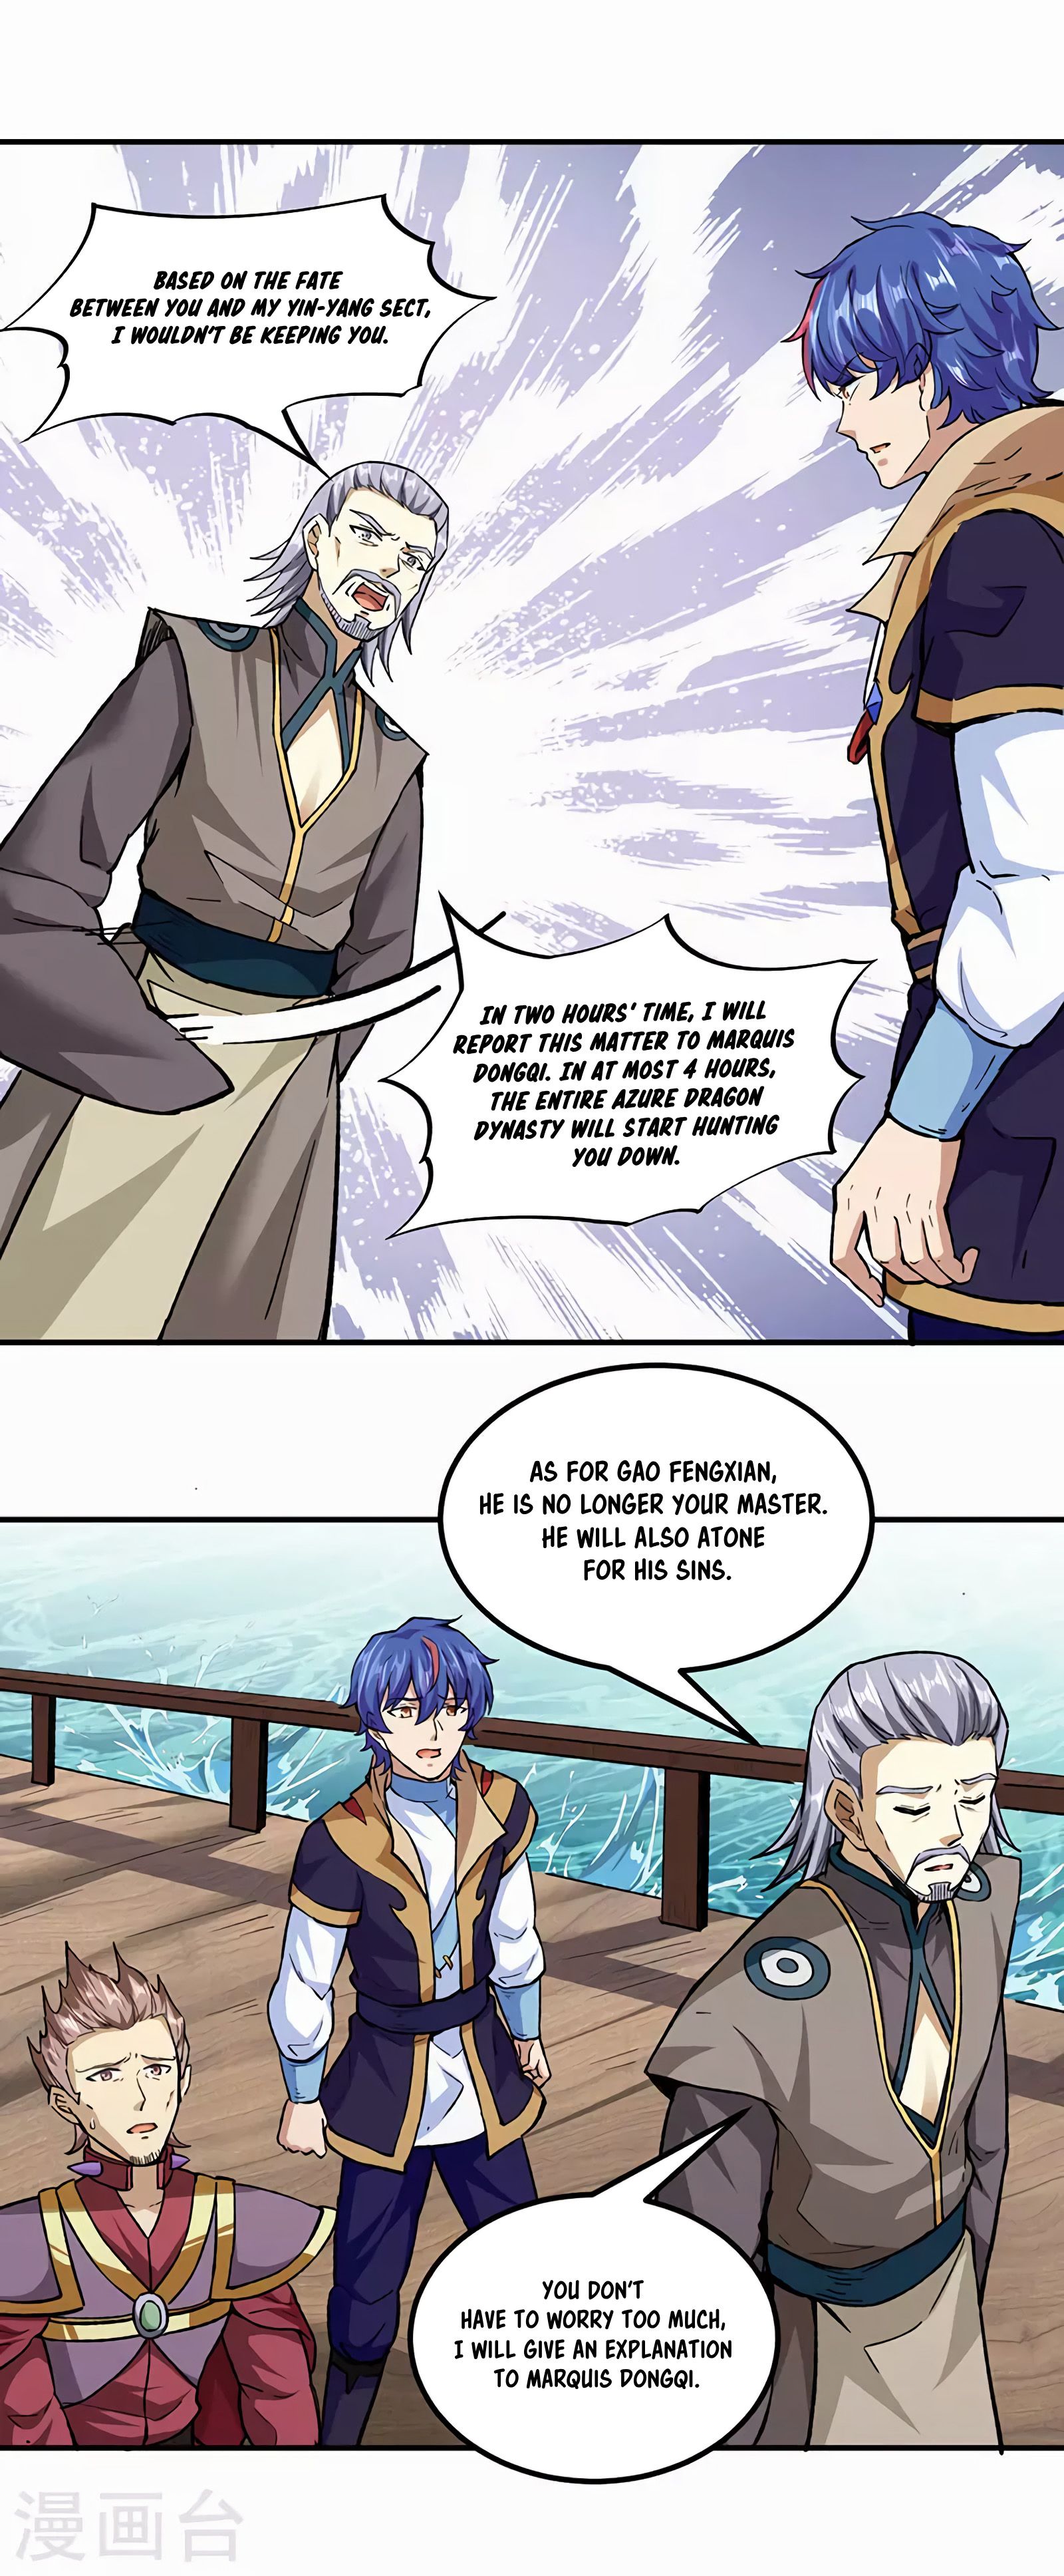 The 10 page of Martial Arts Reigns comic chapter 295